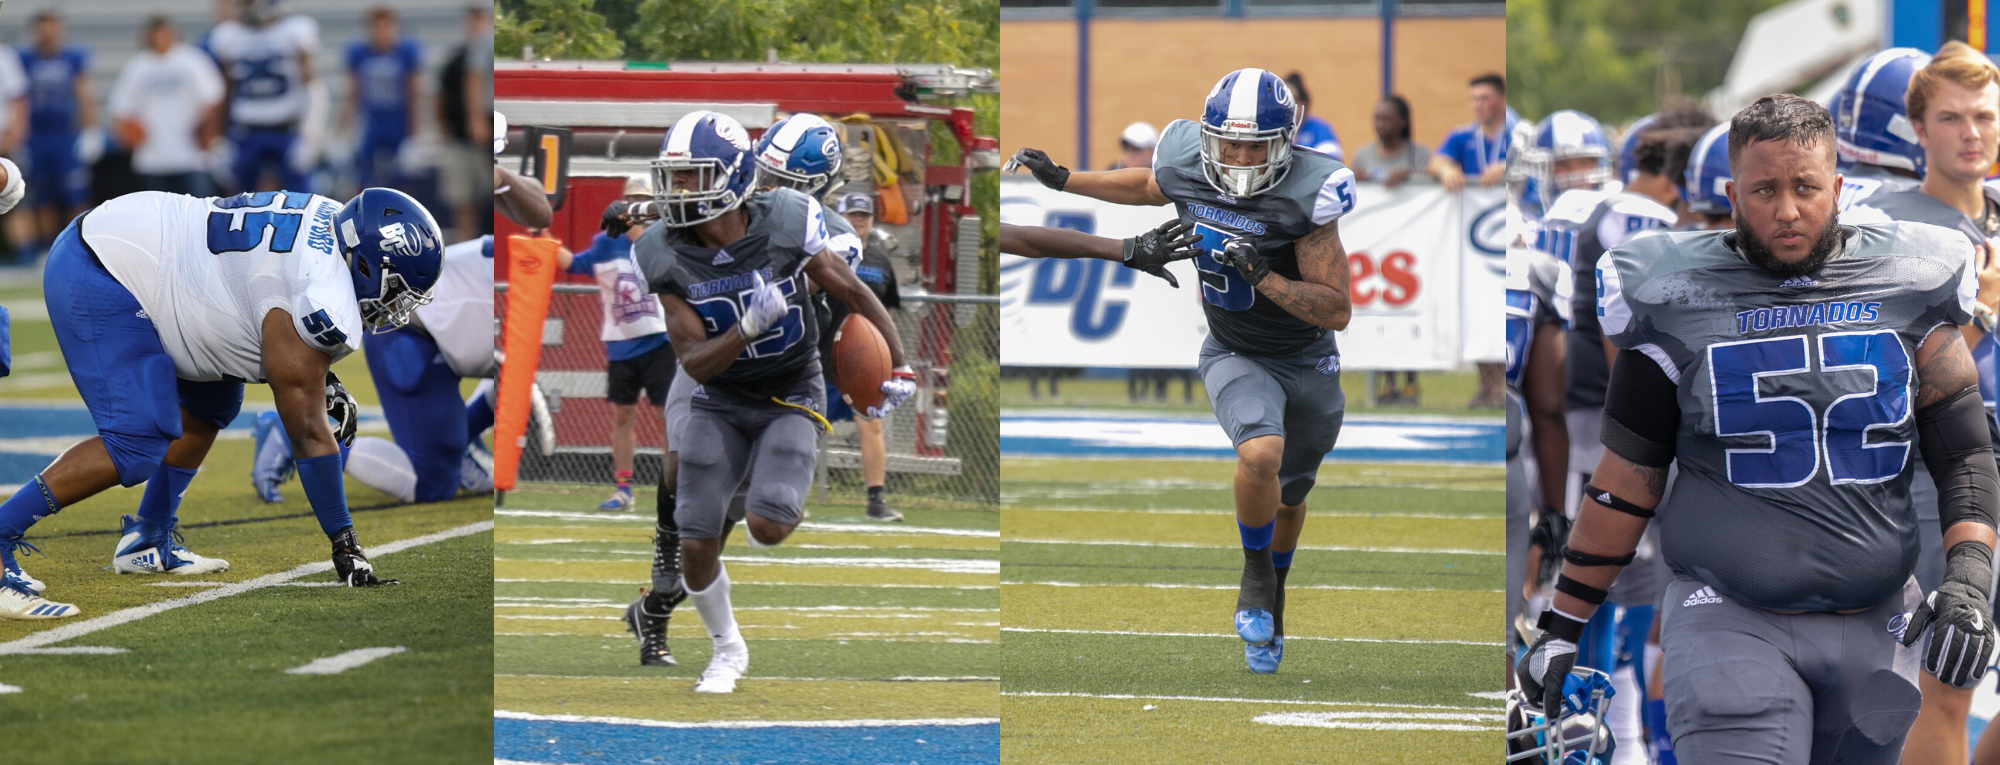 Four Brevard College football senior student-athletes (Pictured L/R: Brandon Crawford, Quentin Jackson, Ralph Roman III, and Josh Romero) will be honored at Saturday's game vs. Averett (Photos courtesy of Cortez Scales Sr & Thom Kennedy '21).